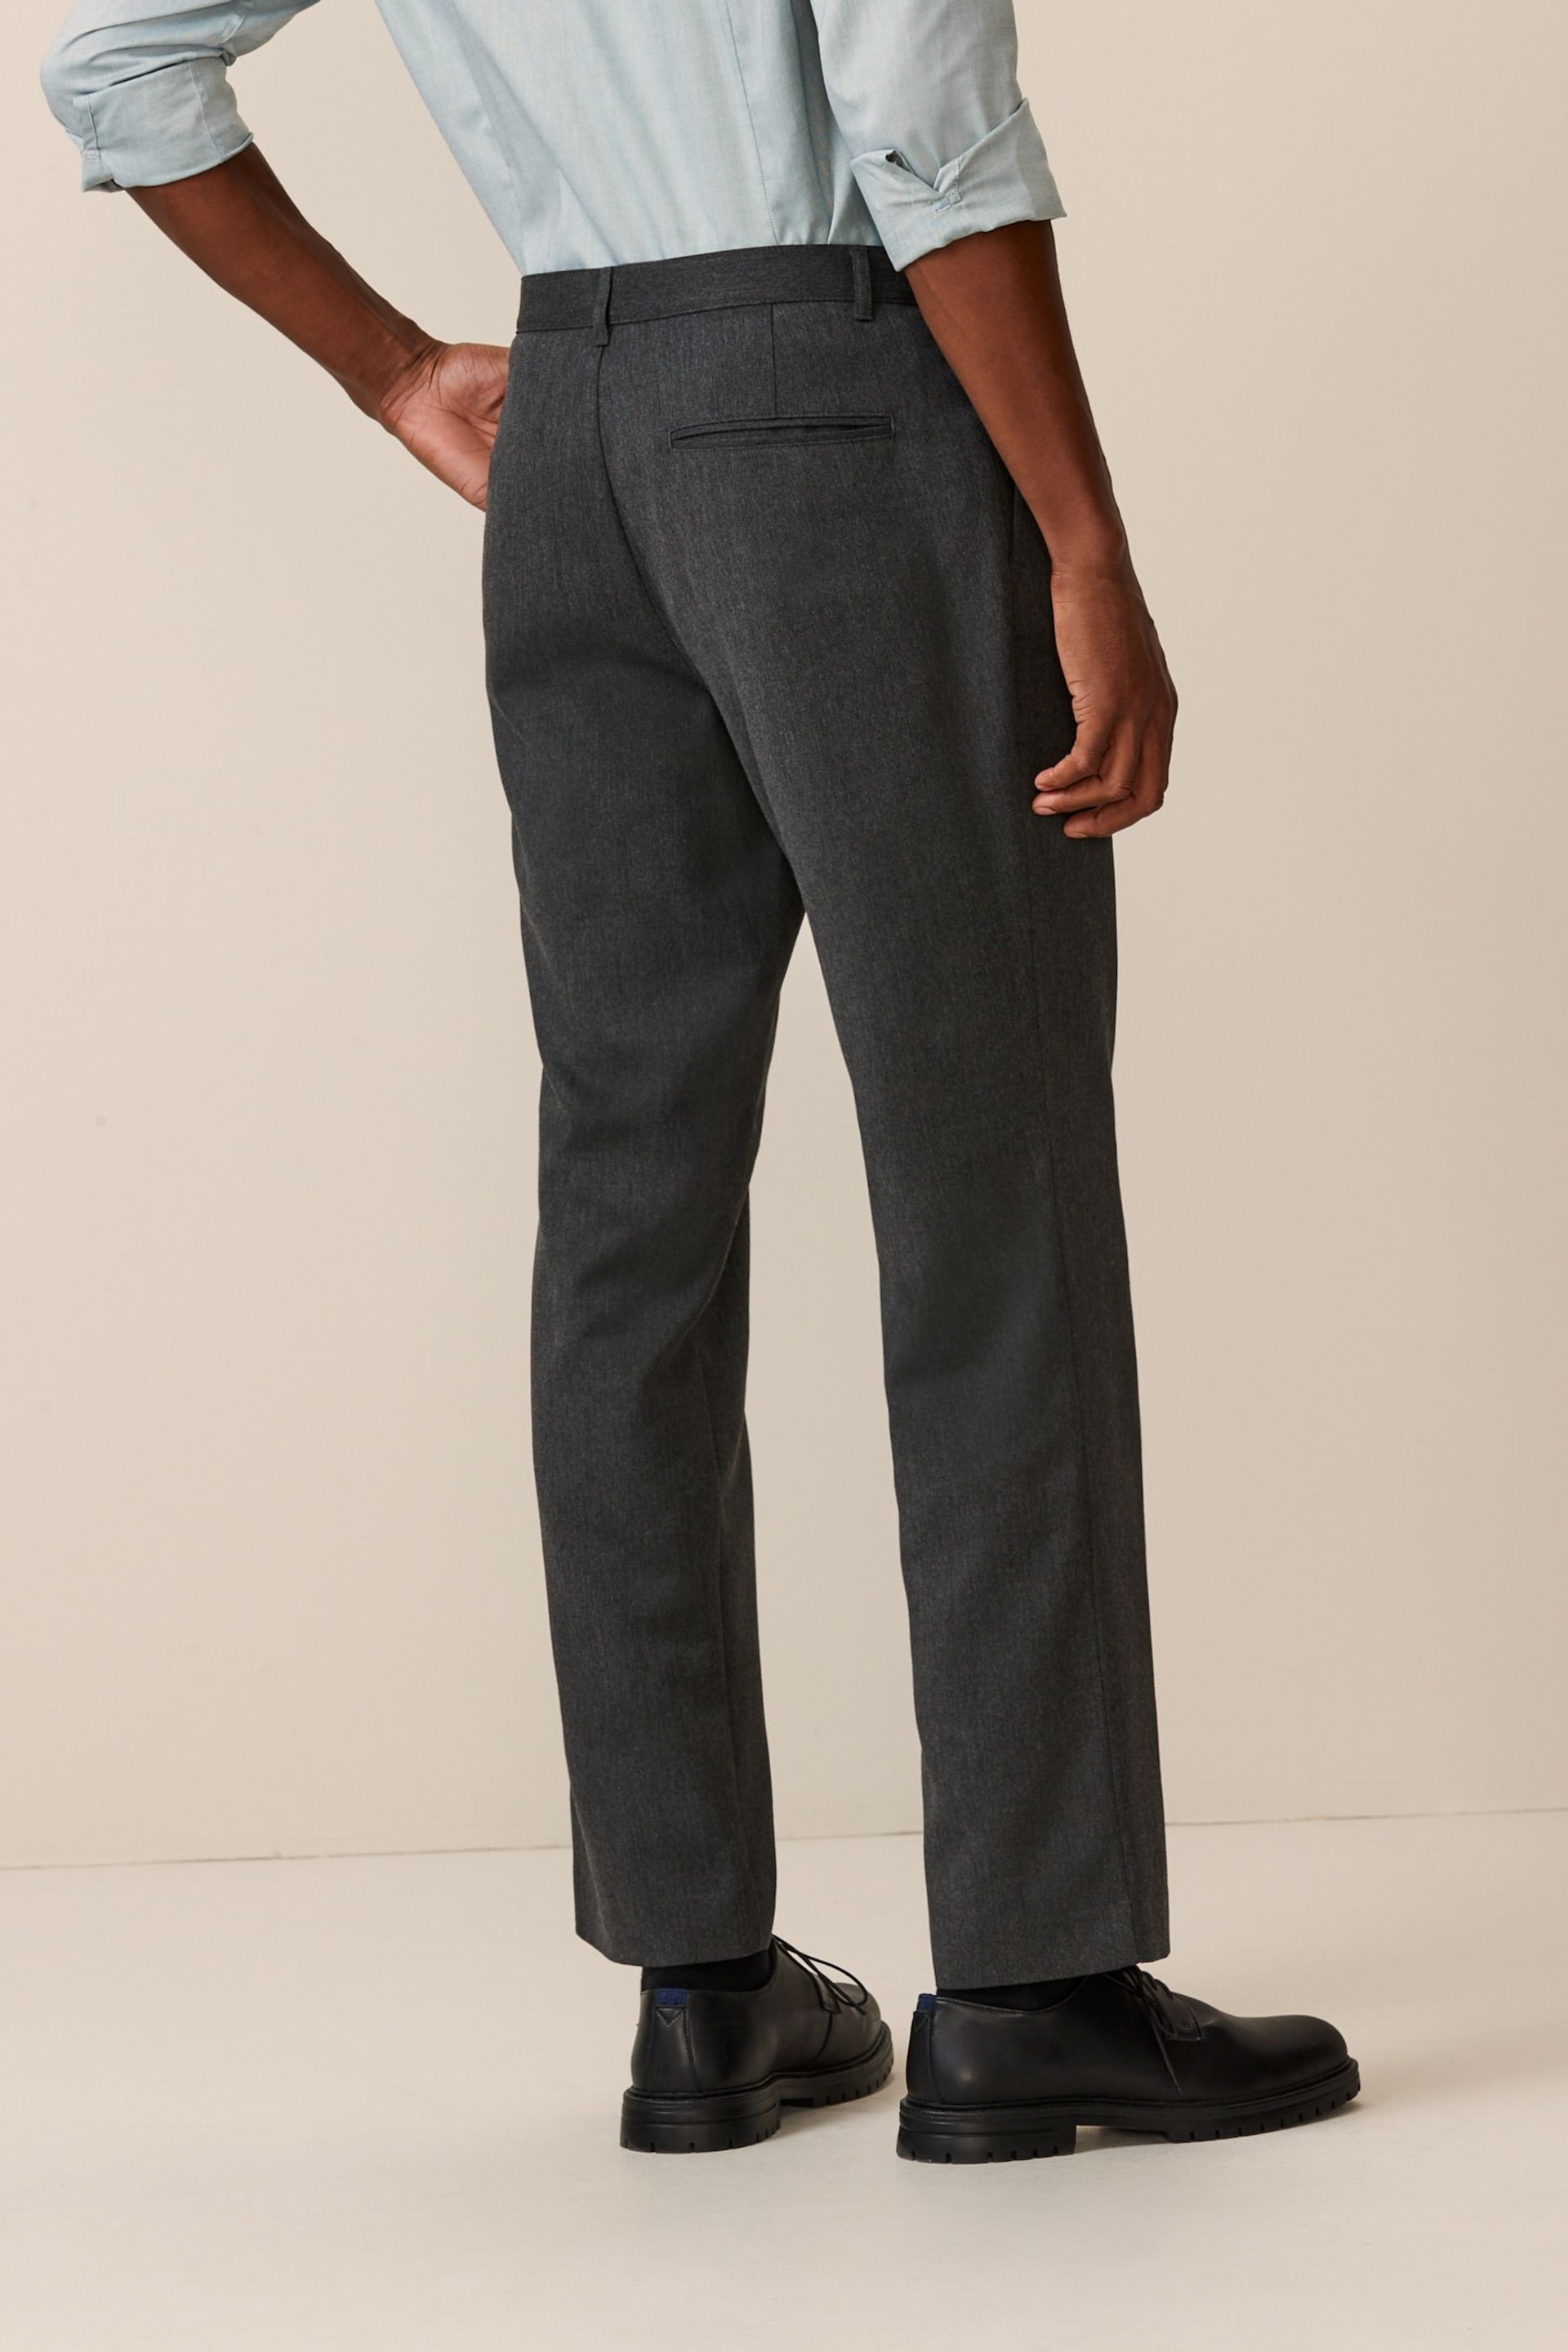 Grey Plain Front Smart Trousers - Image 3 of 9